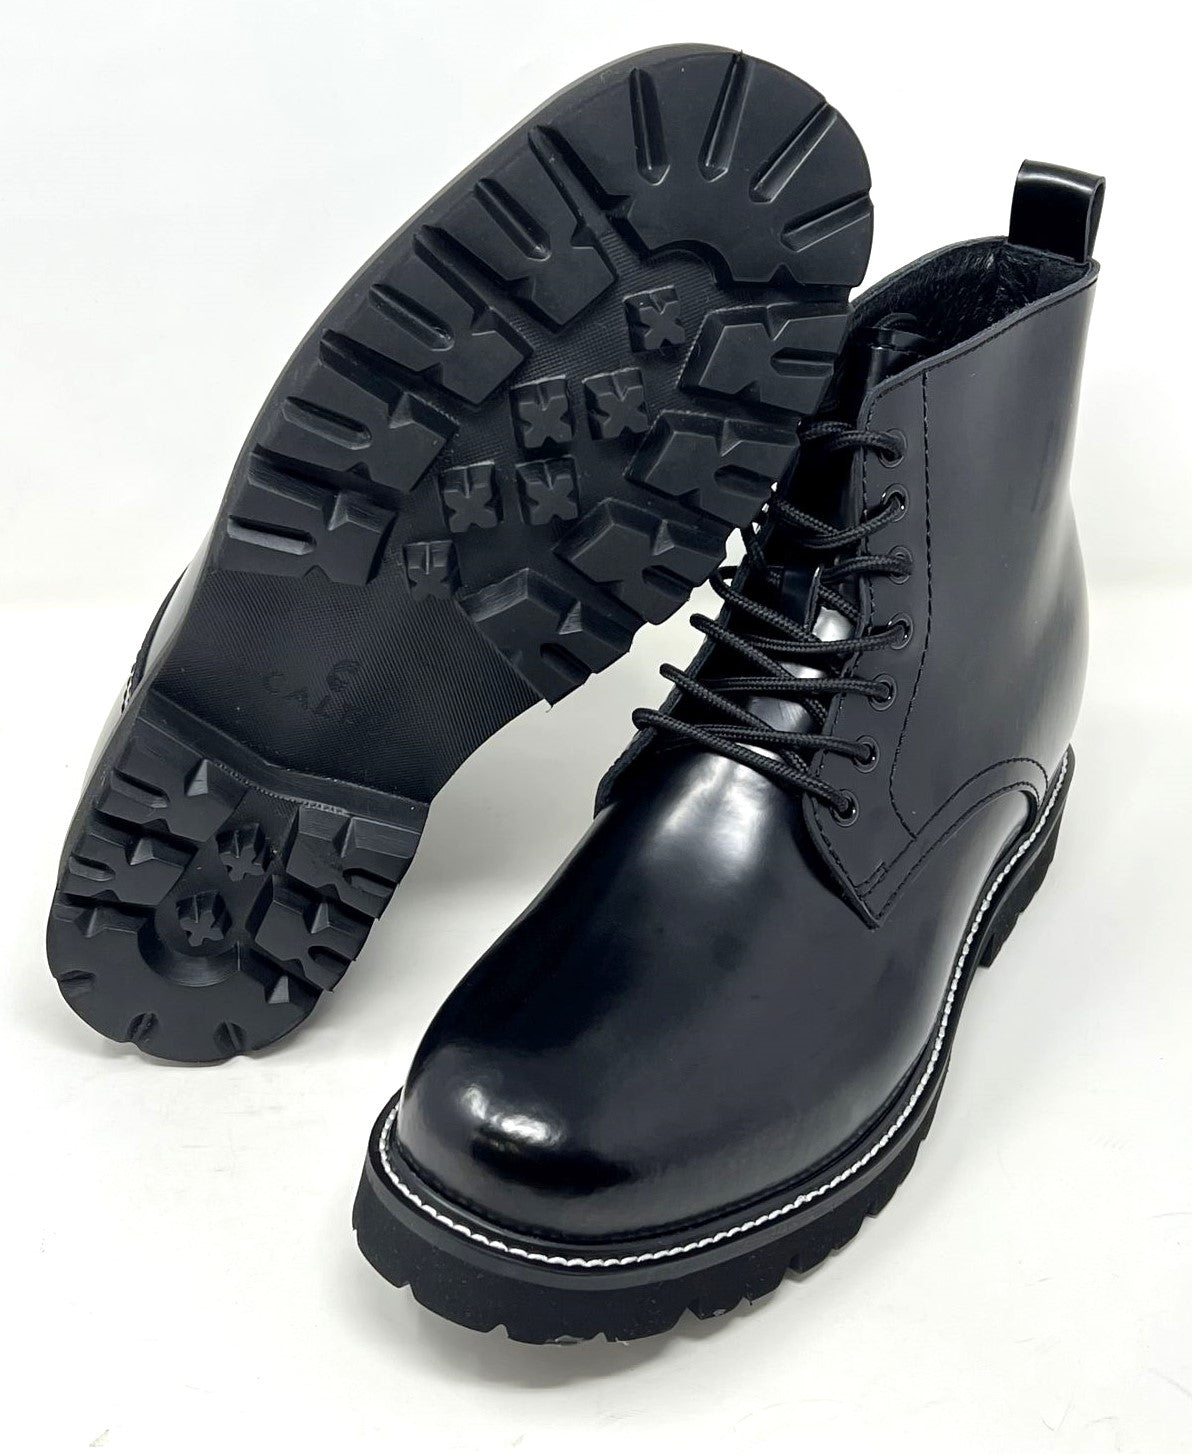 FSY0081 - 3.4 Inches Taller (Black) - Size 11 Only